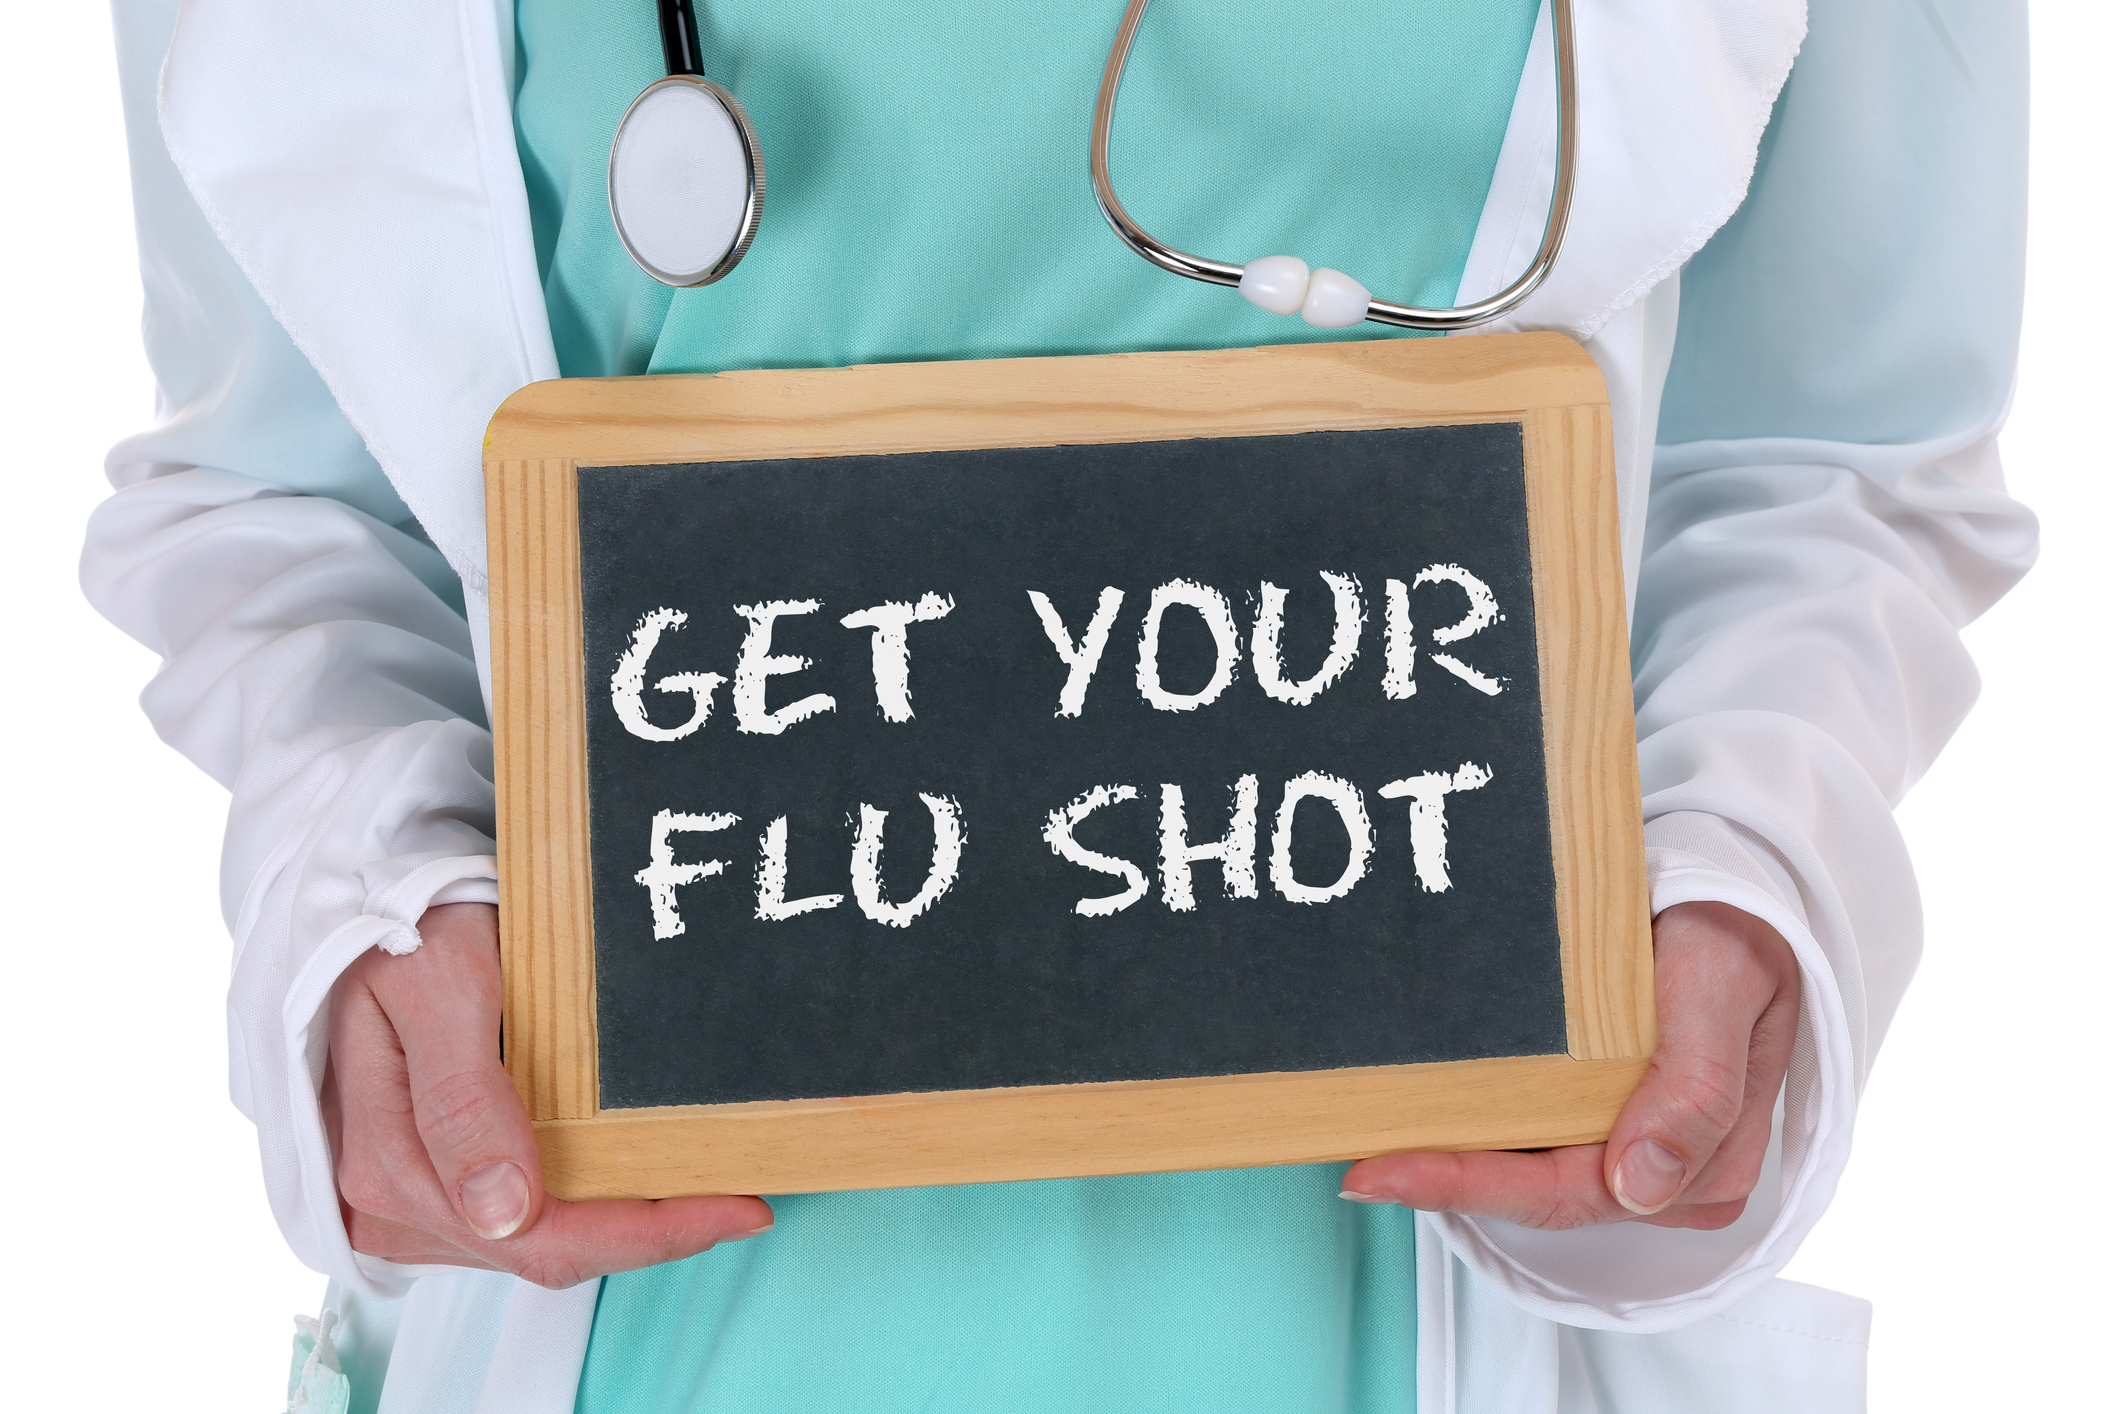 It's a Good Time to Get Your Flu Vaccine